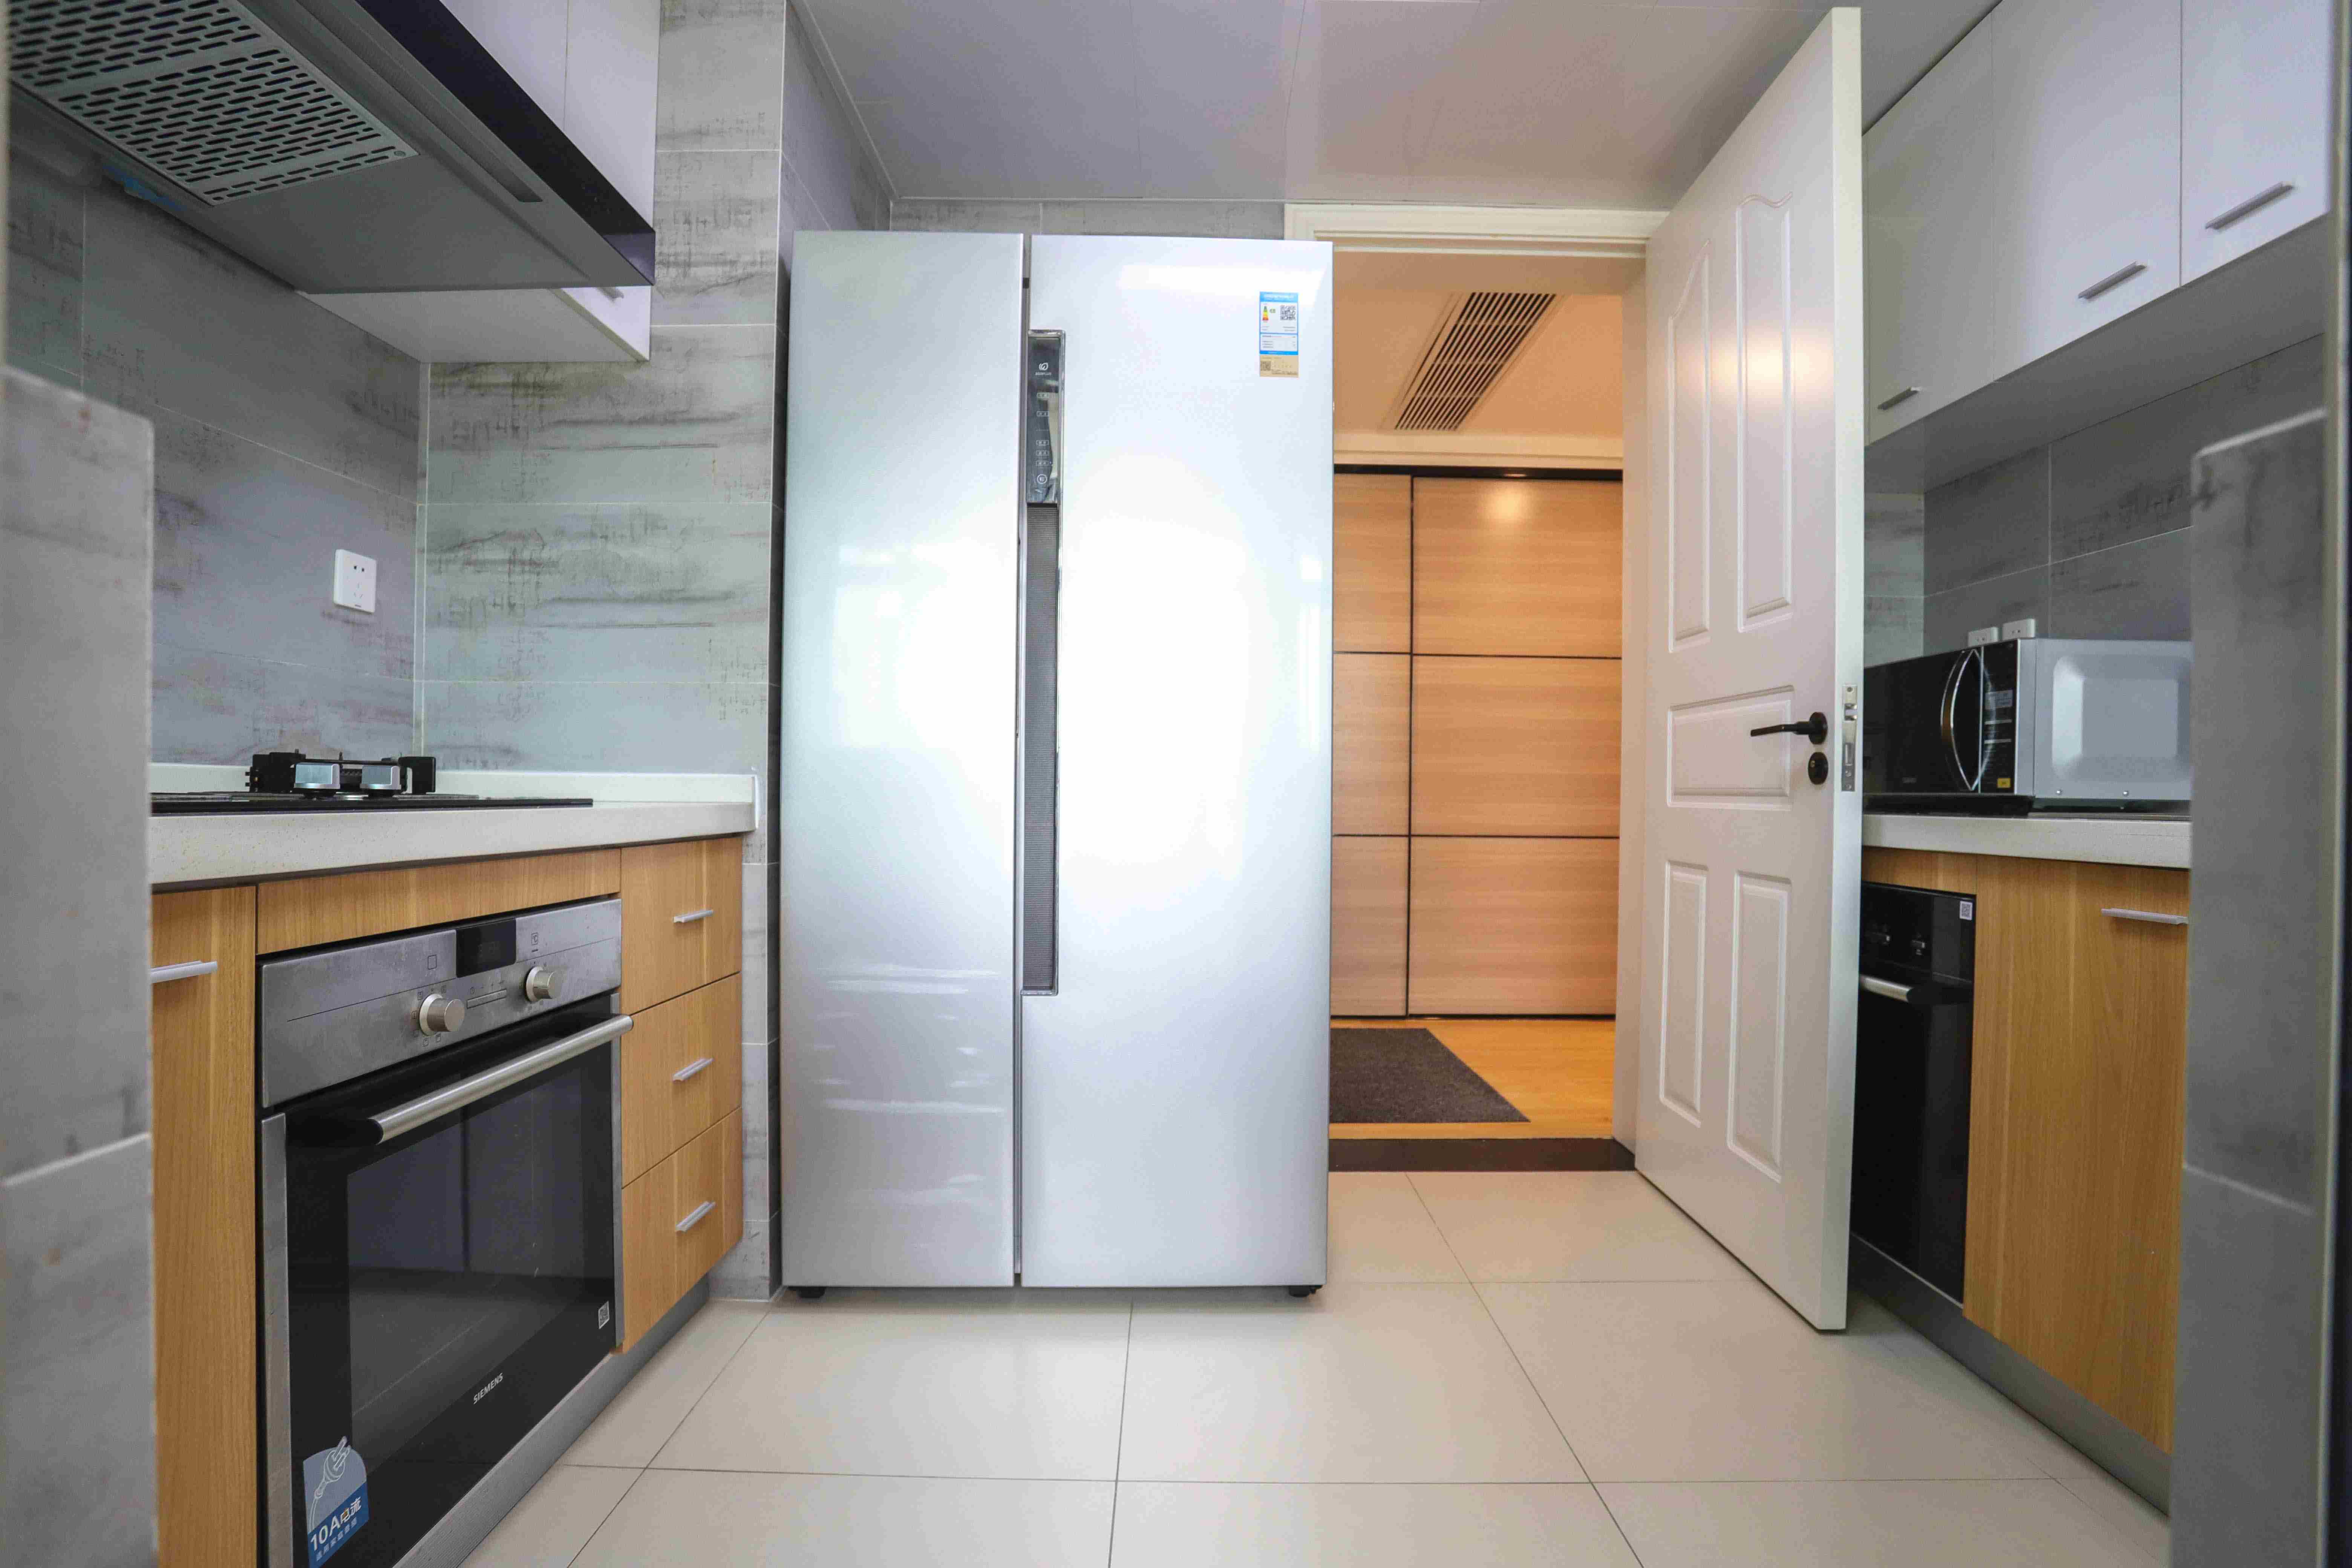 nice kitchen New Modern Bright Spacious 2BR One Park Ave Apt for Rent in Shanghai Jing’an Near LN 2/7